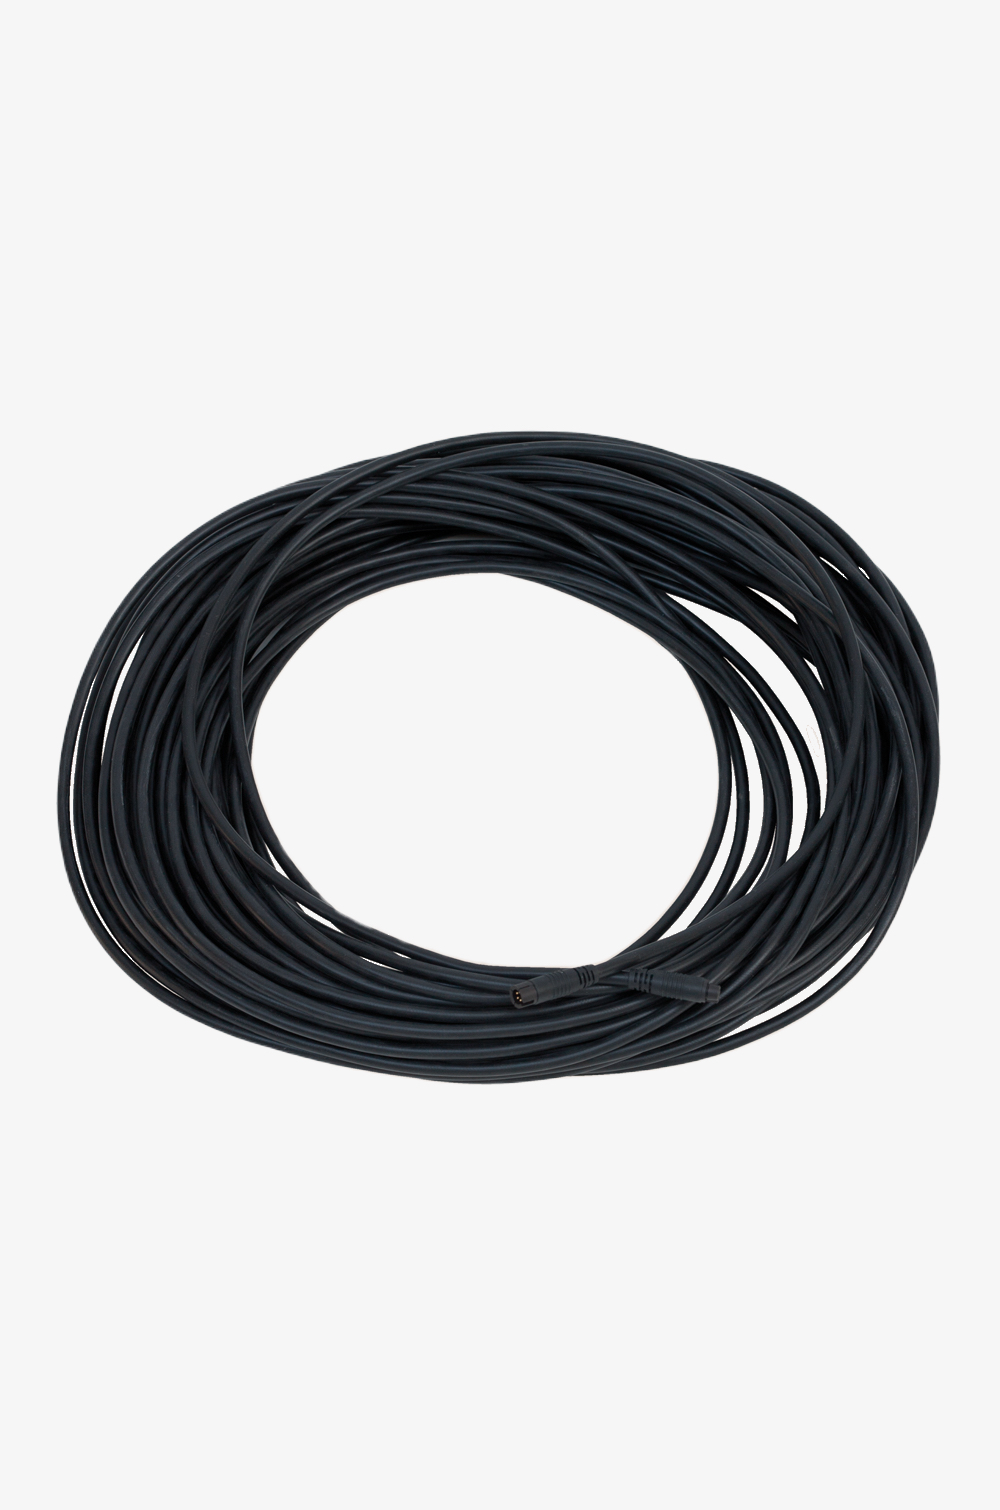 Connecting Cable for Remote Control (30m)